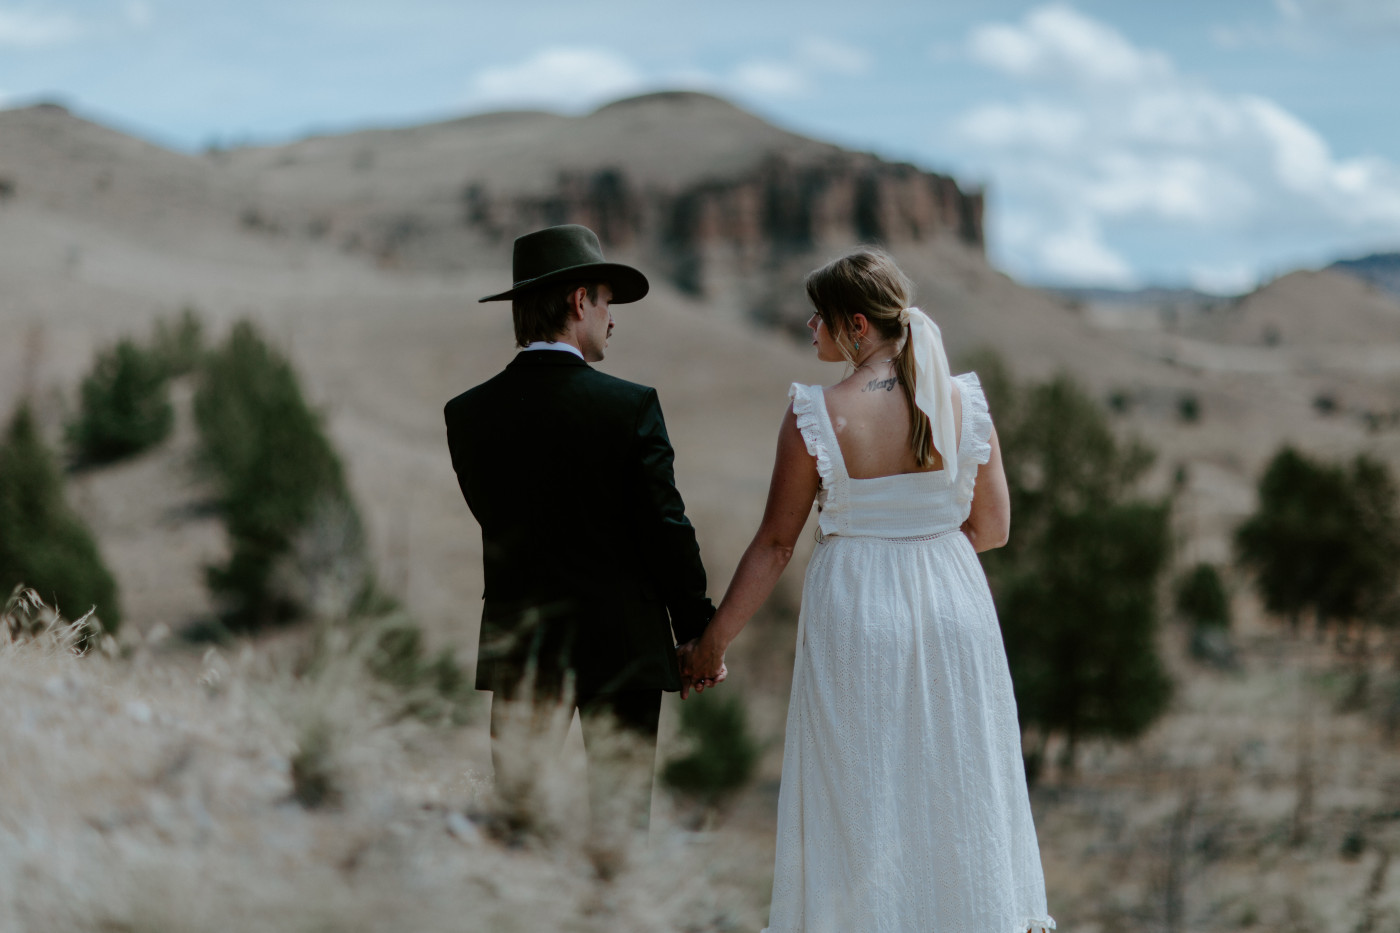 Greyson and Emily hold hands. Elopement photography in the Central Oregon desert by Sienna Plus Josh.